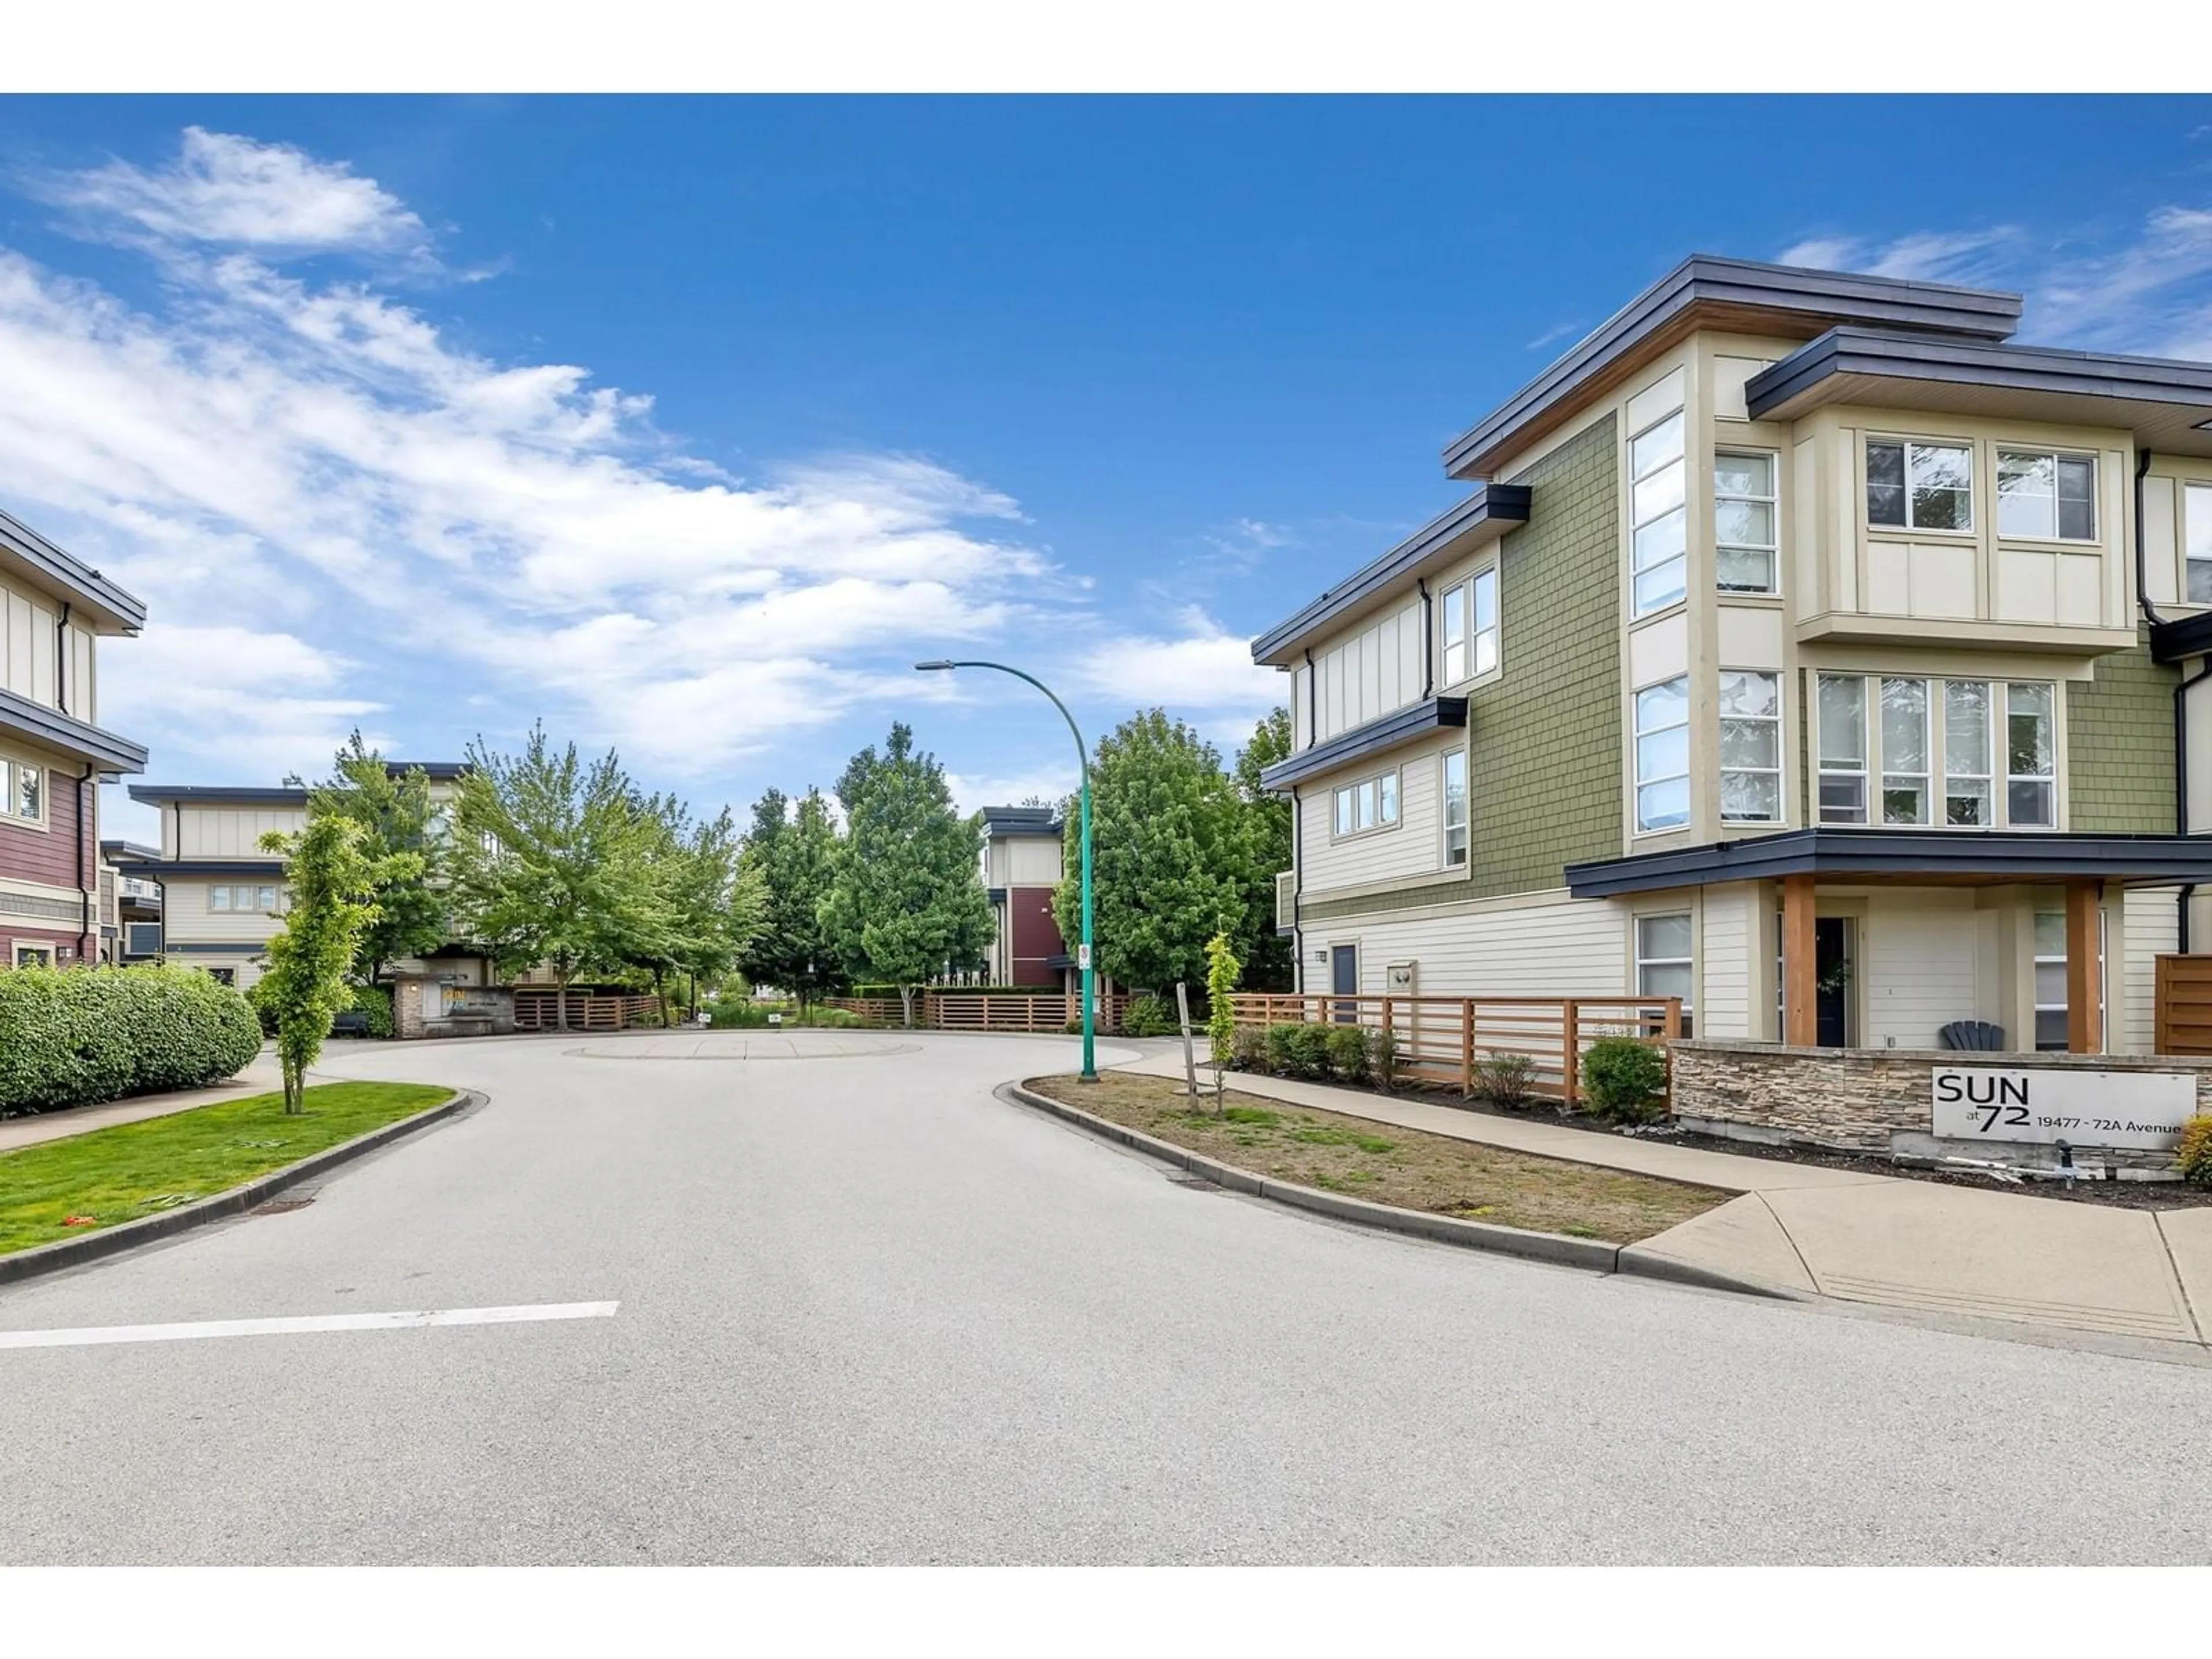 A pic from exterior of the house or condo for 66 19477 72A AVENUE, Surrey British Columbia V4N6M2